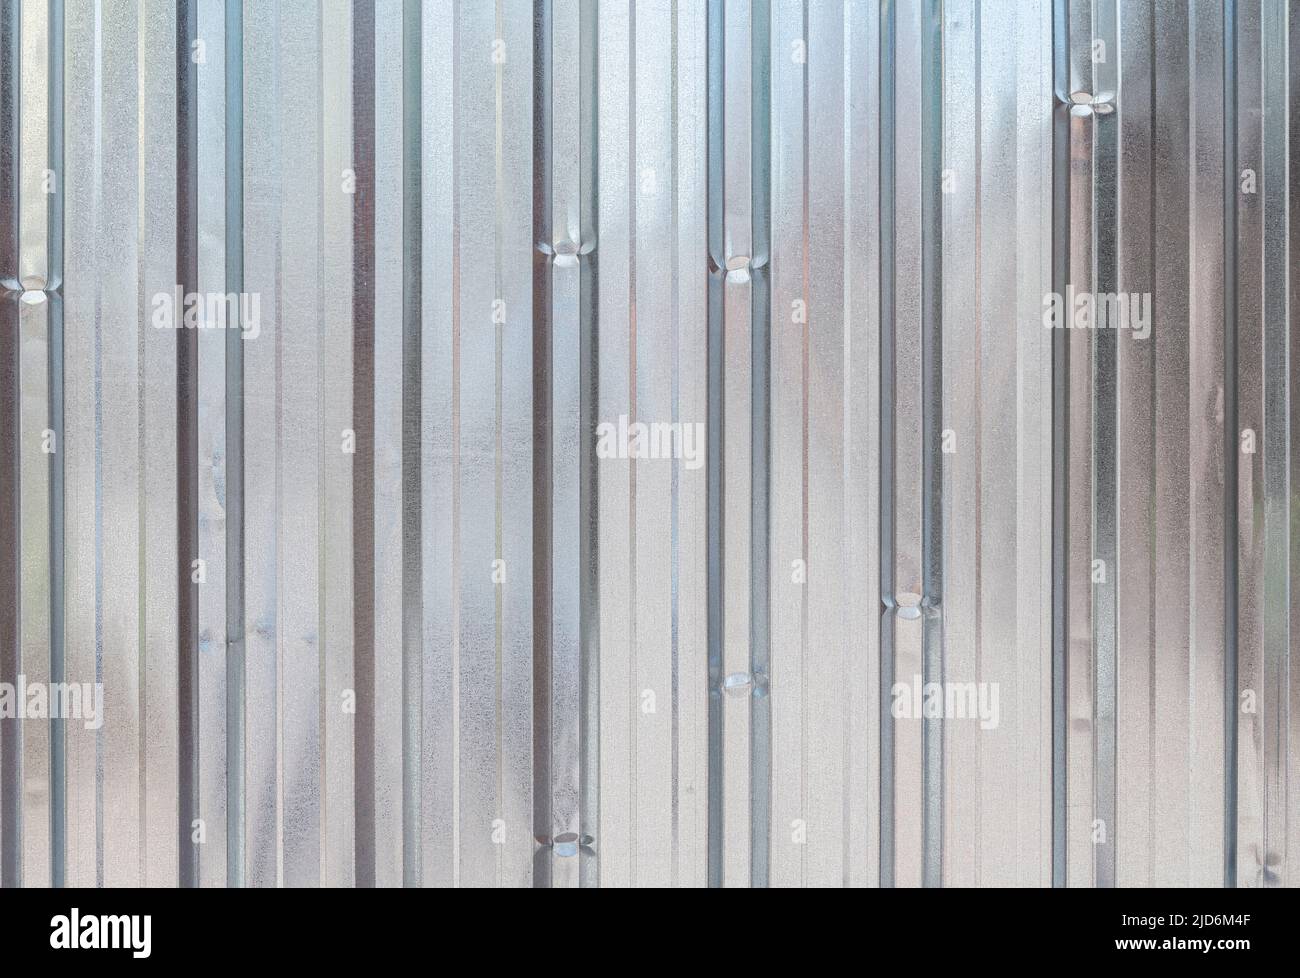 Shiny, corrugated, galvanized metal wall background, front view. High resolution full frame textured abstract background. Copy space. Stock Photo